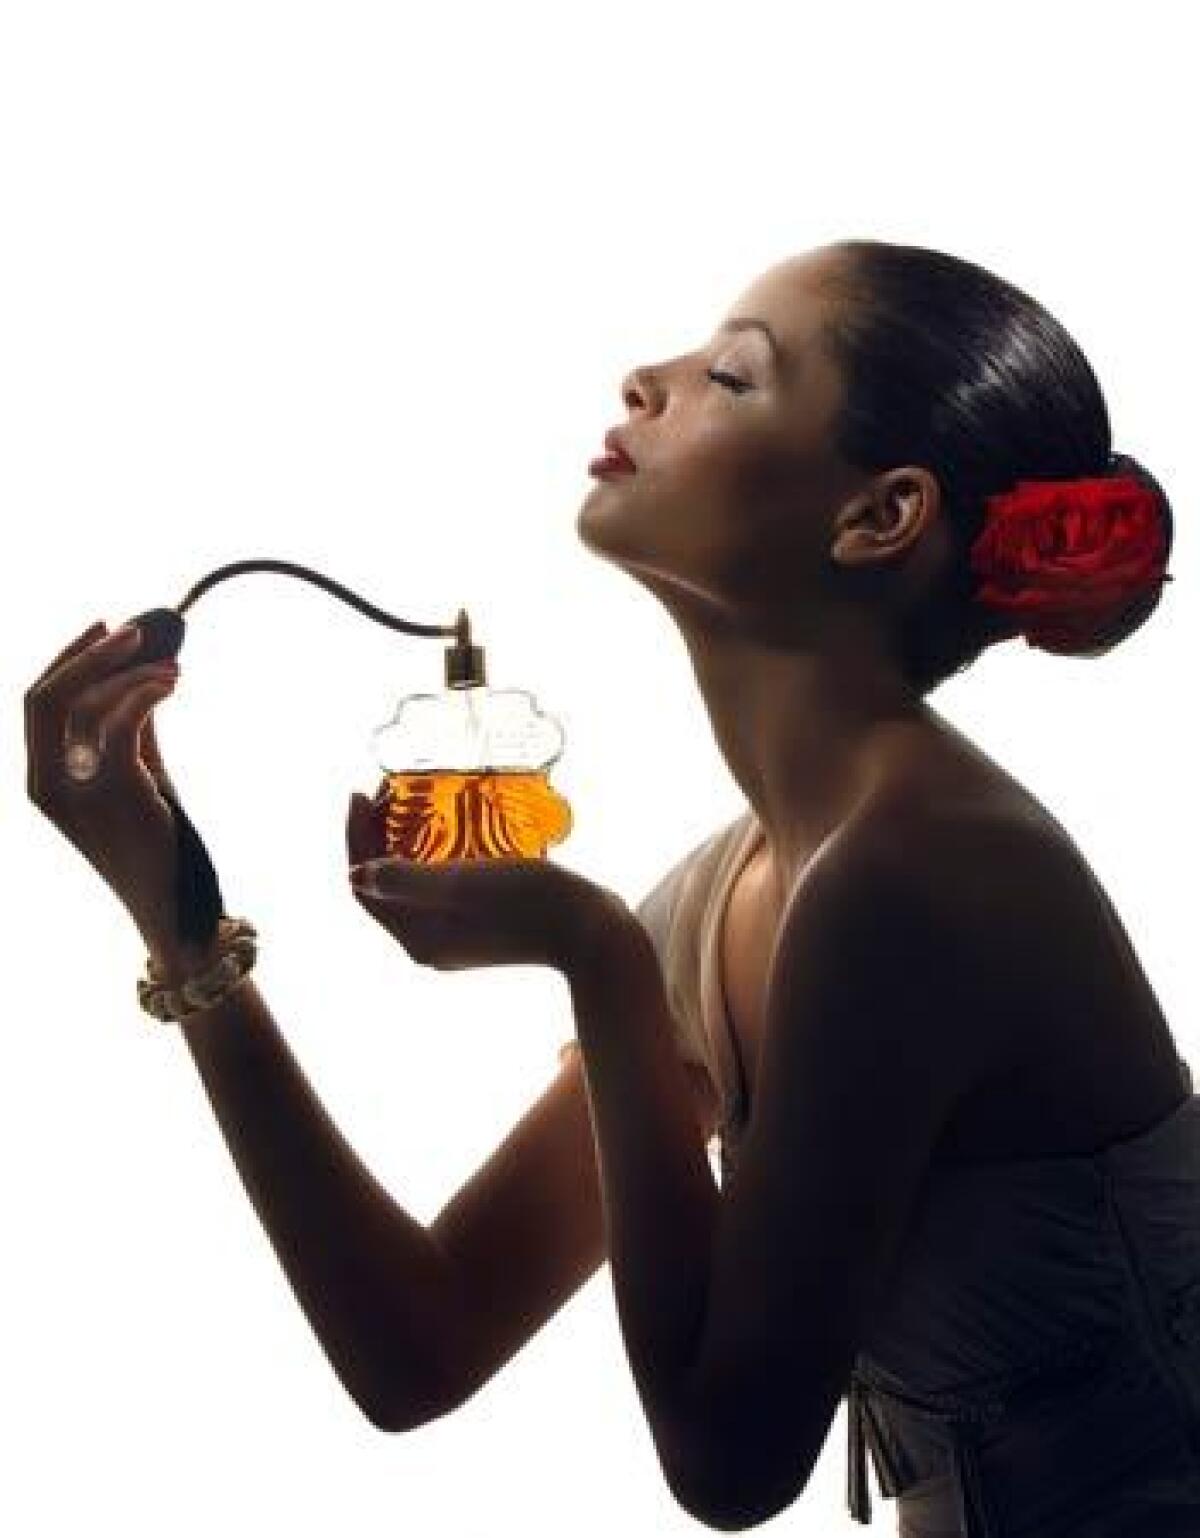 Perfume may be a pleasure to those who wear it, but its over-application is often a nuisance to others.